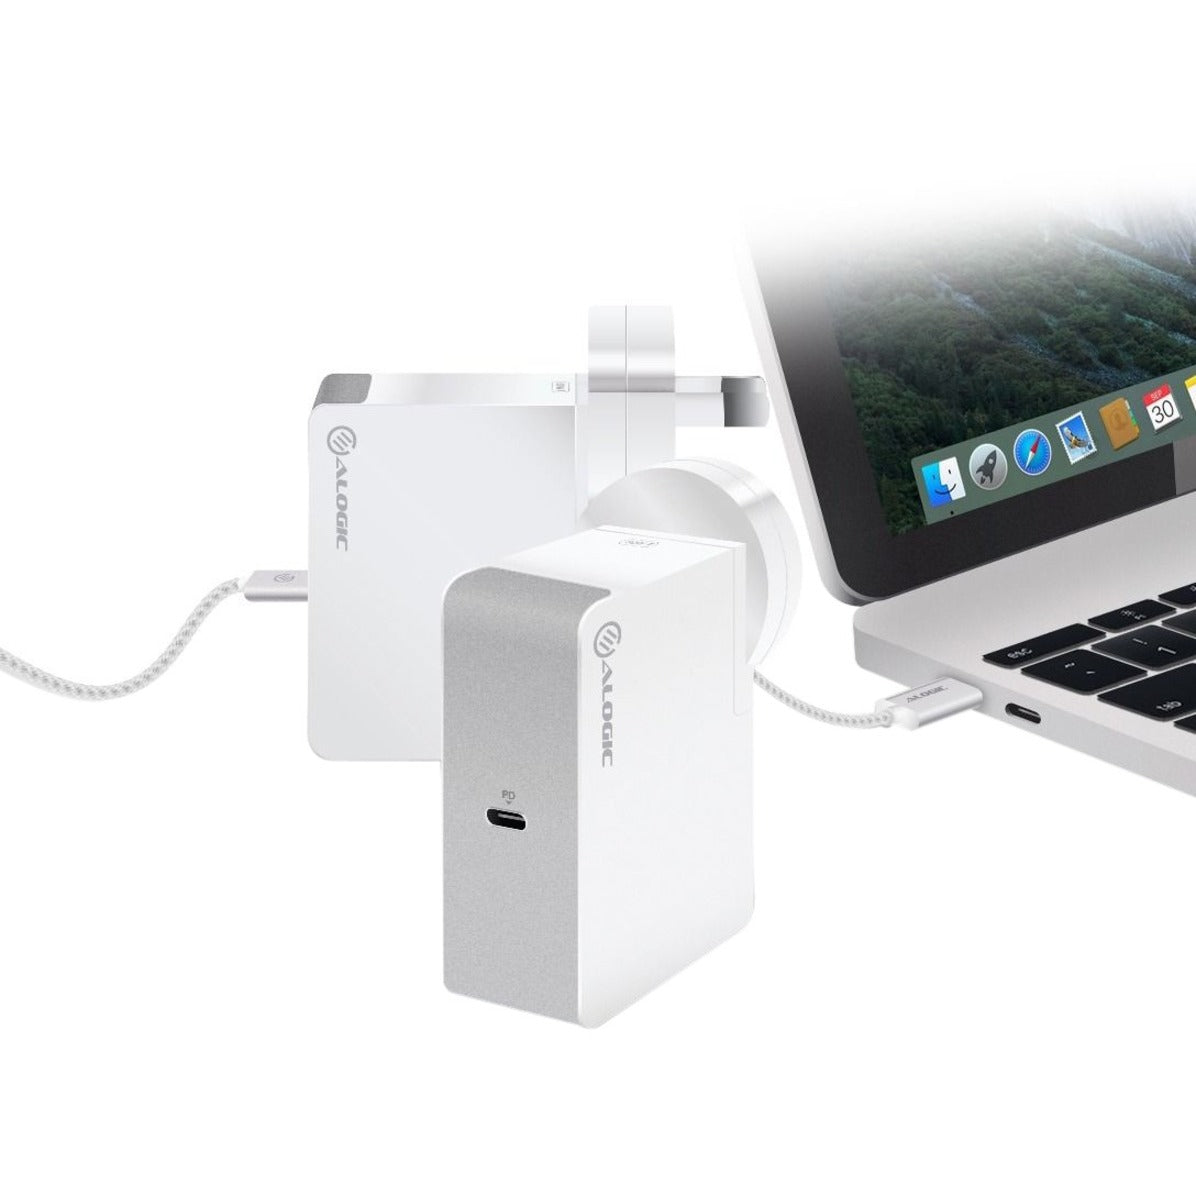 ALOGIC USB-C Laptop/Macbook Wall Charger 60W with Power Delivery- Travel Edition with AU EU UK US Plugs and 2m Cable